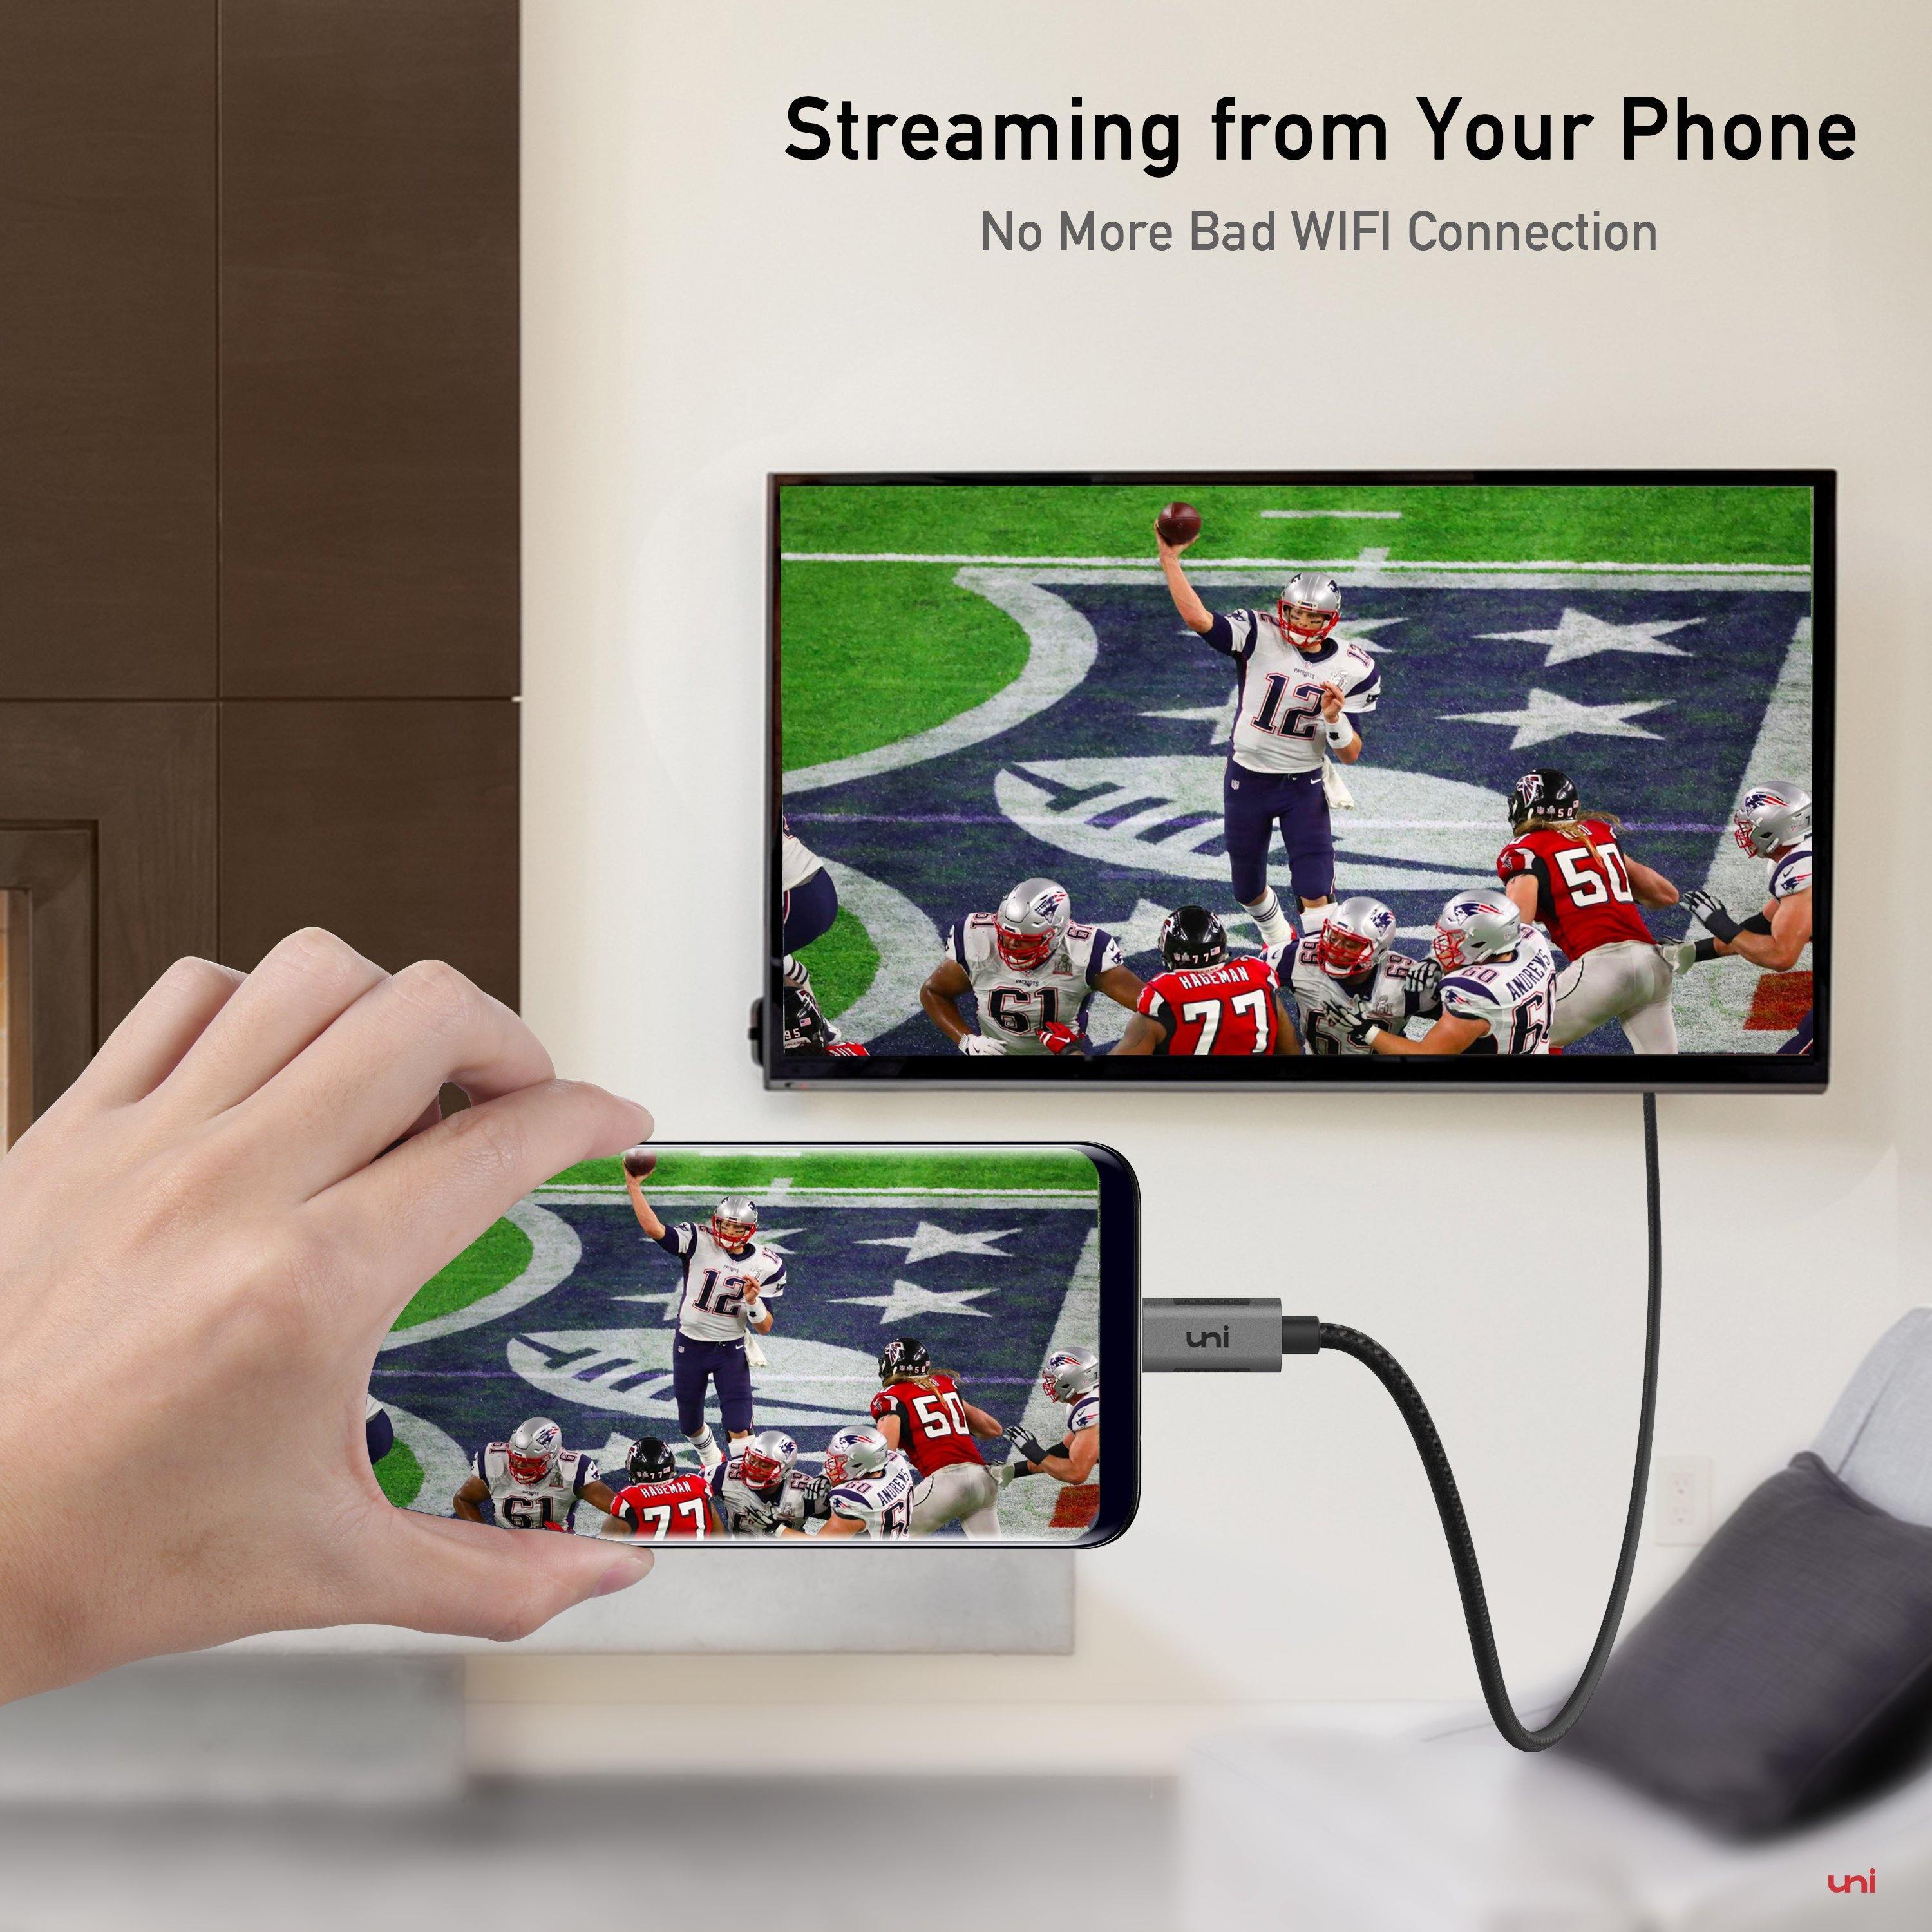 Streaming from. your Smartphone with uni 4K USB-C to HDMI Cable